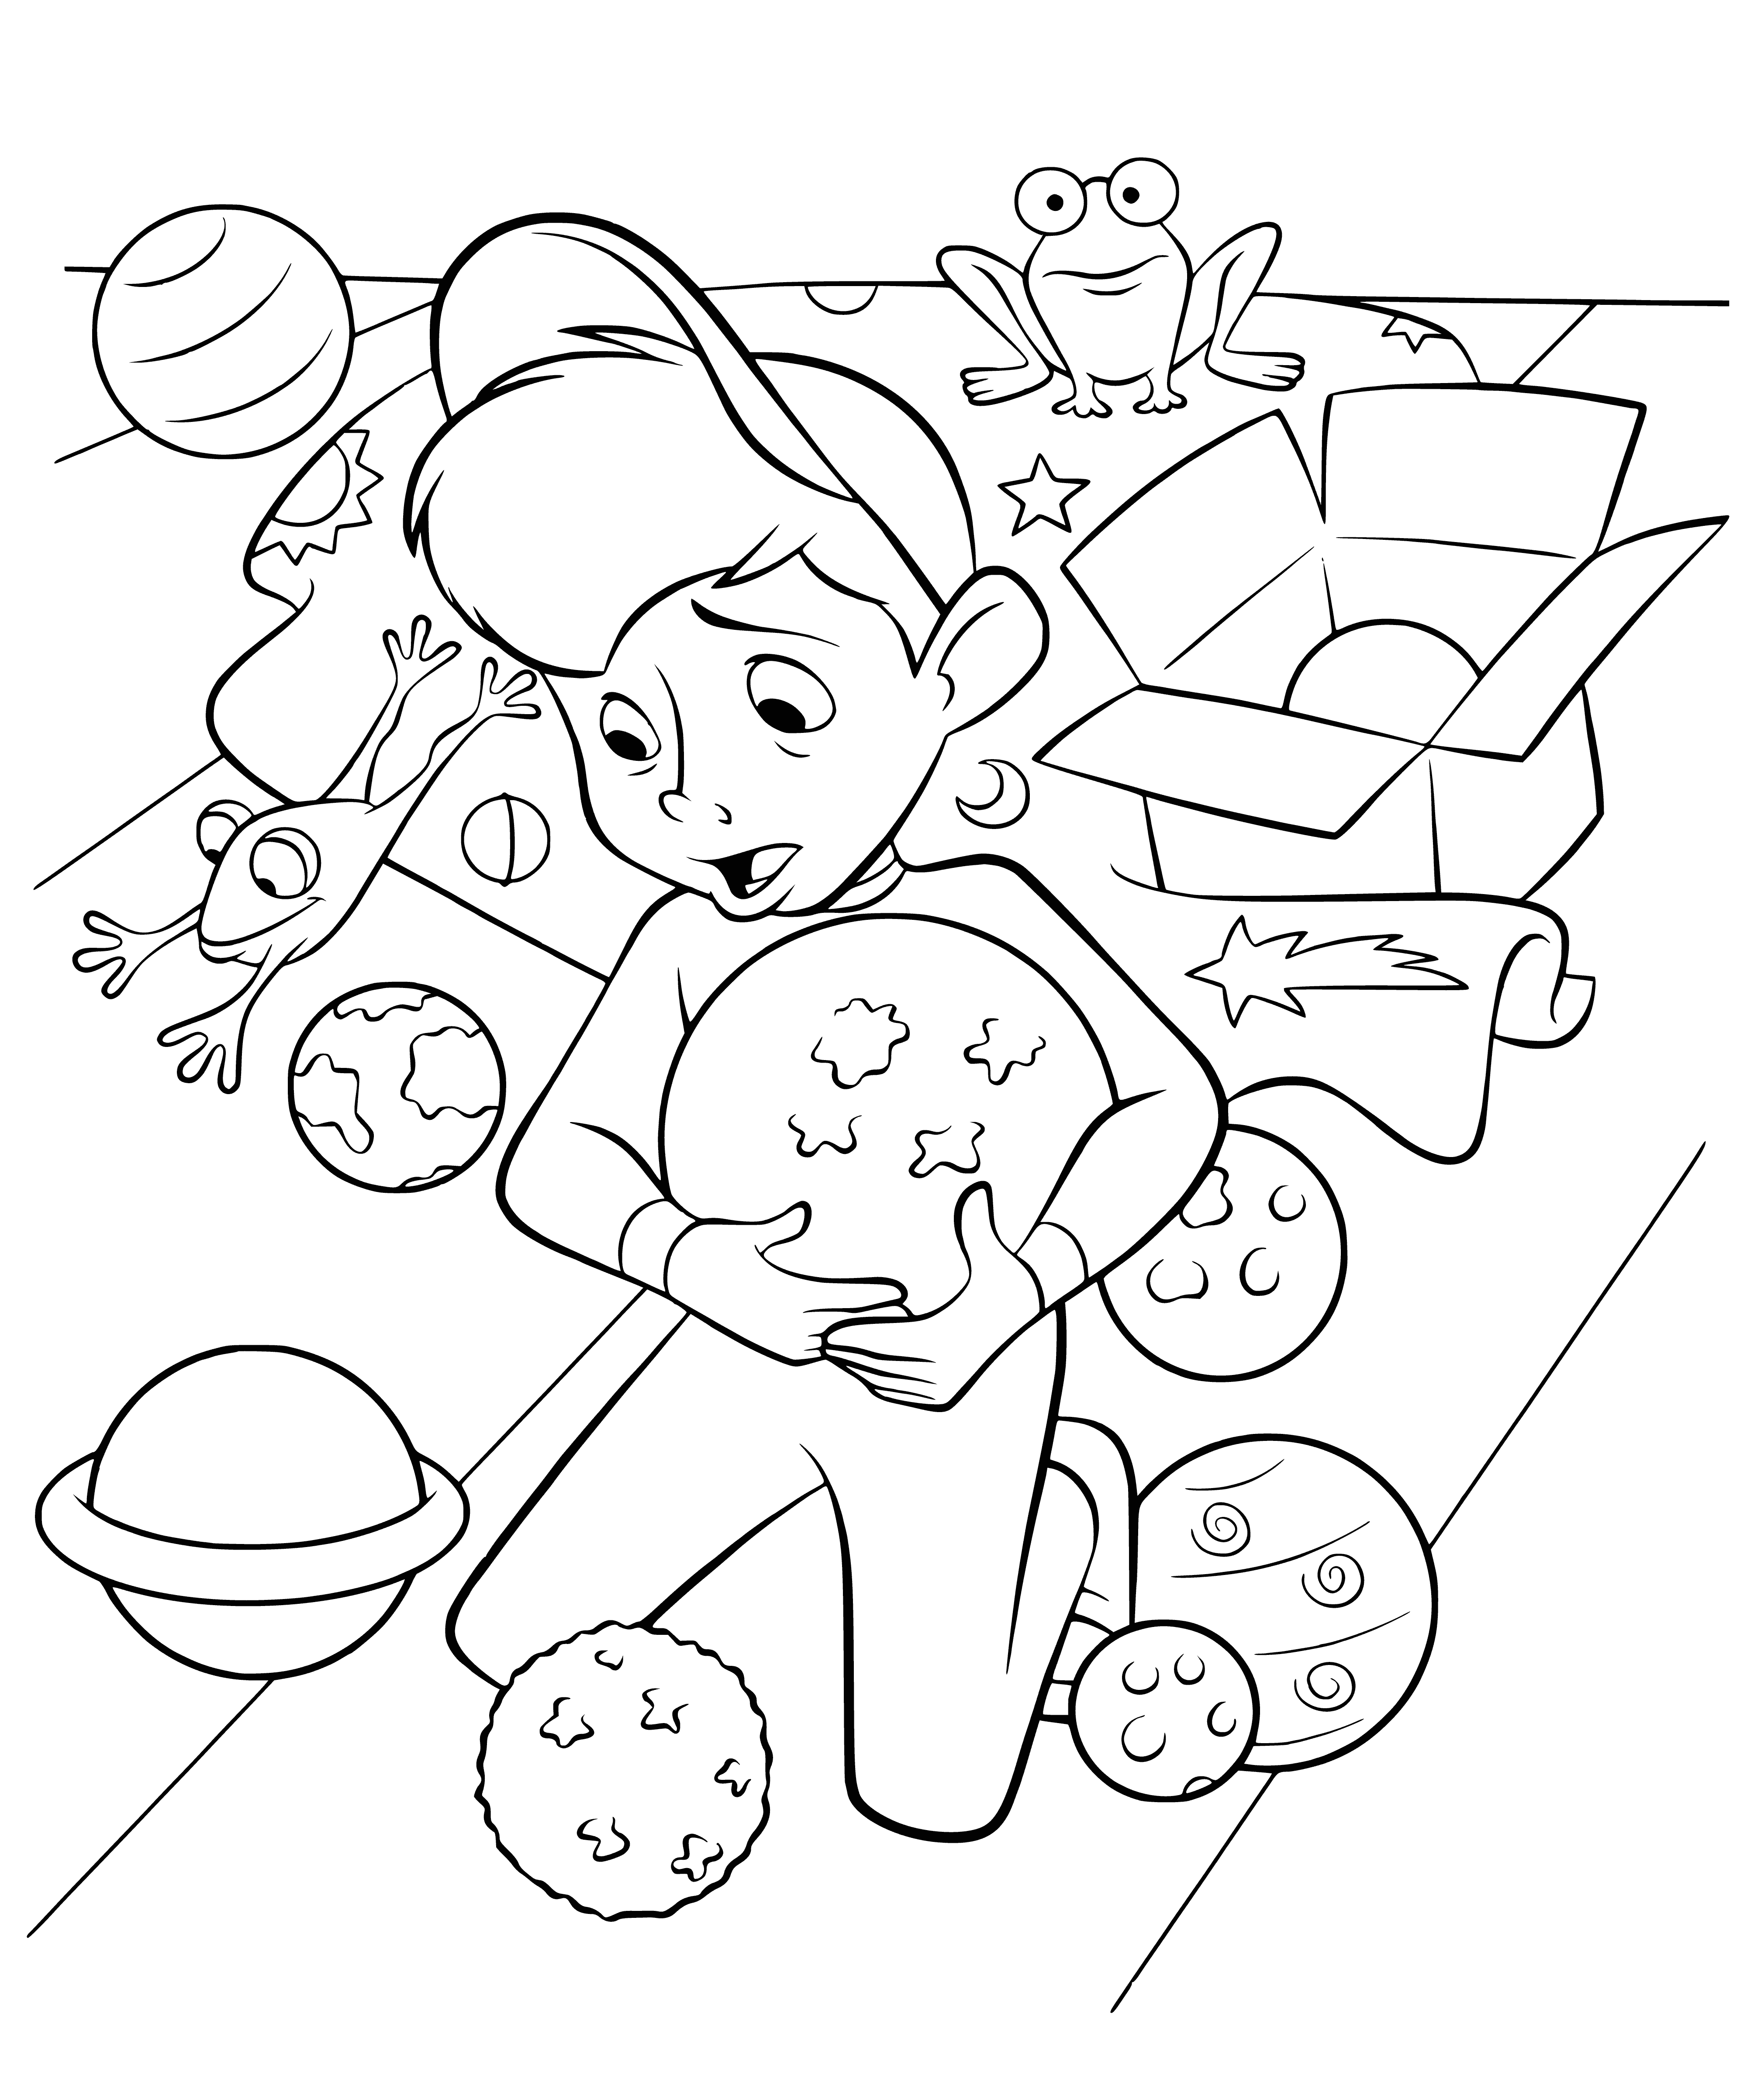 Frogs and planets coloring page